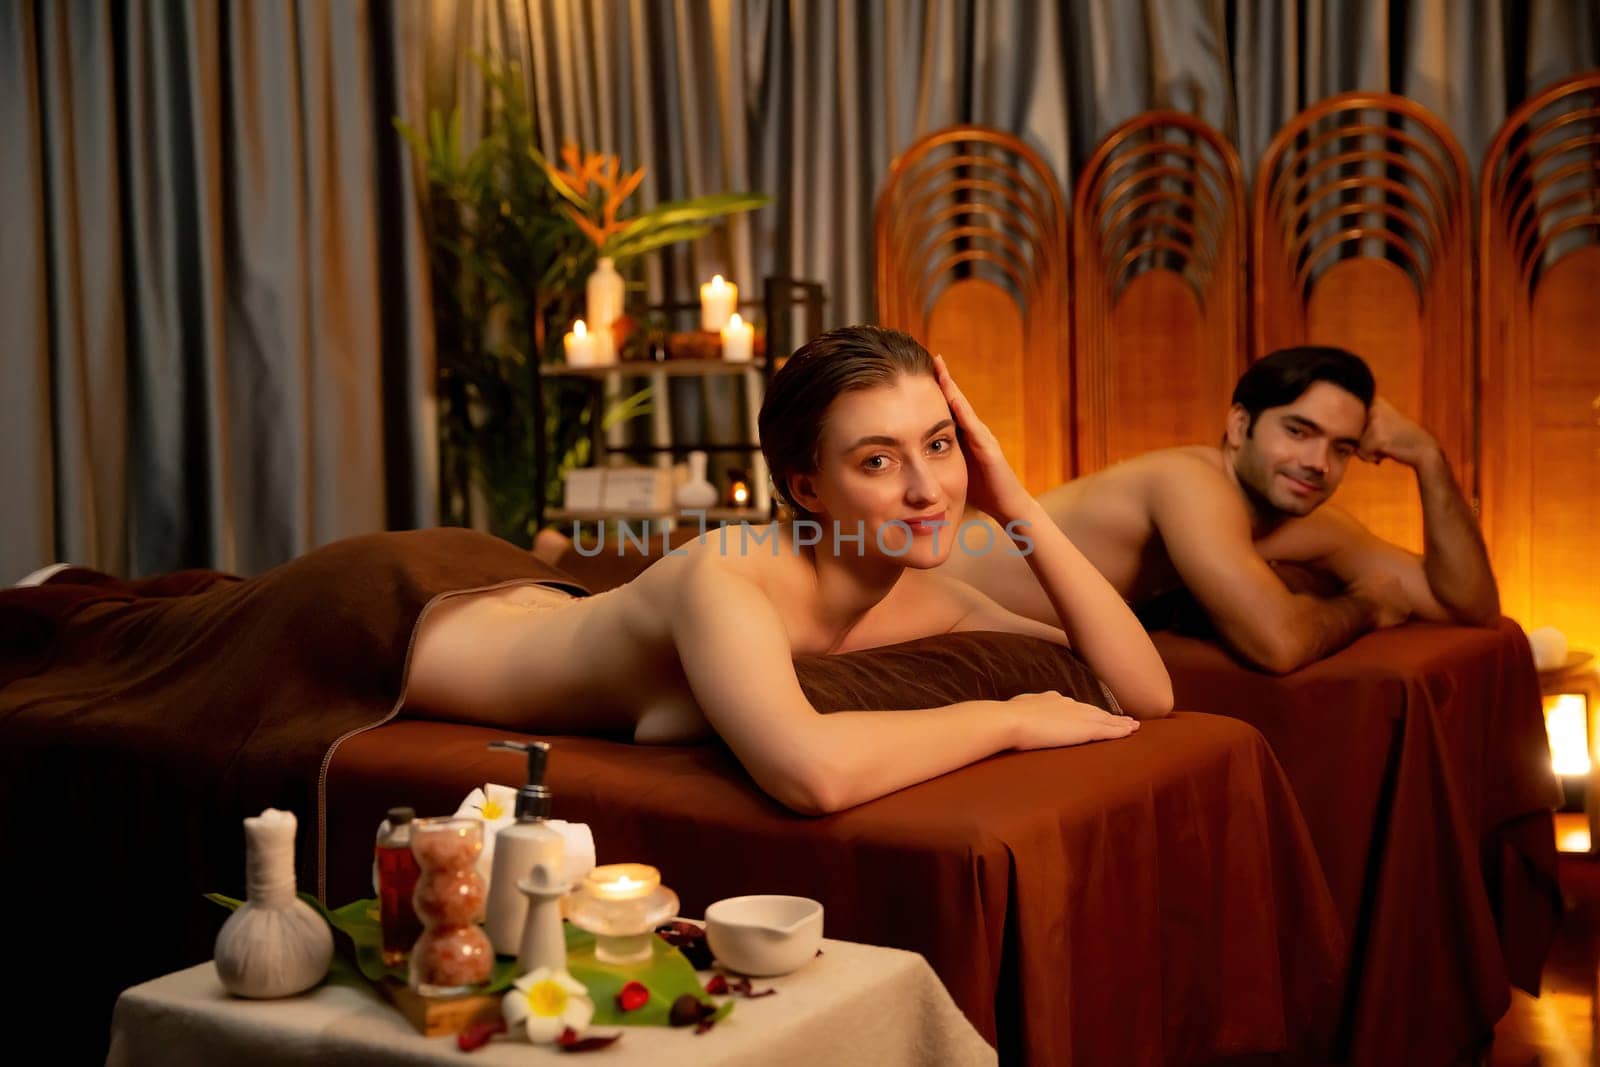 Couple customer having exfoliation treatment in luxury spa salon with warmth candle light ambient. Salt scrub beauty treatment in Health spa body scrub. Quiescent